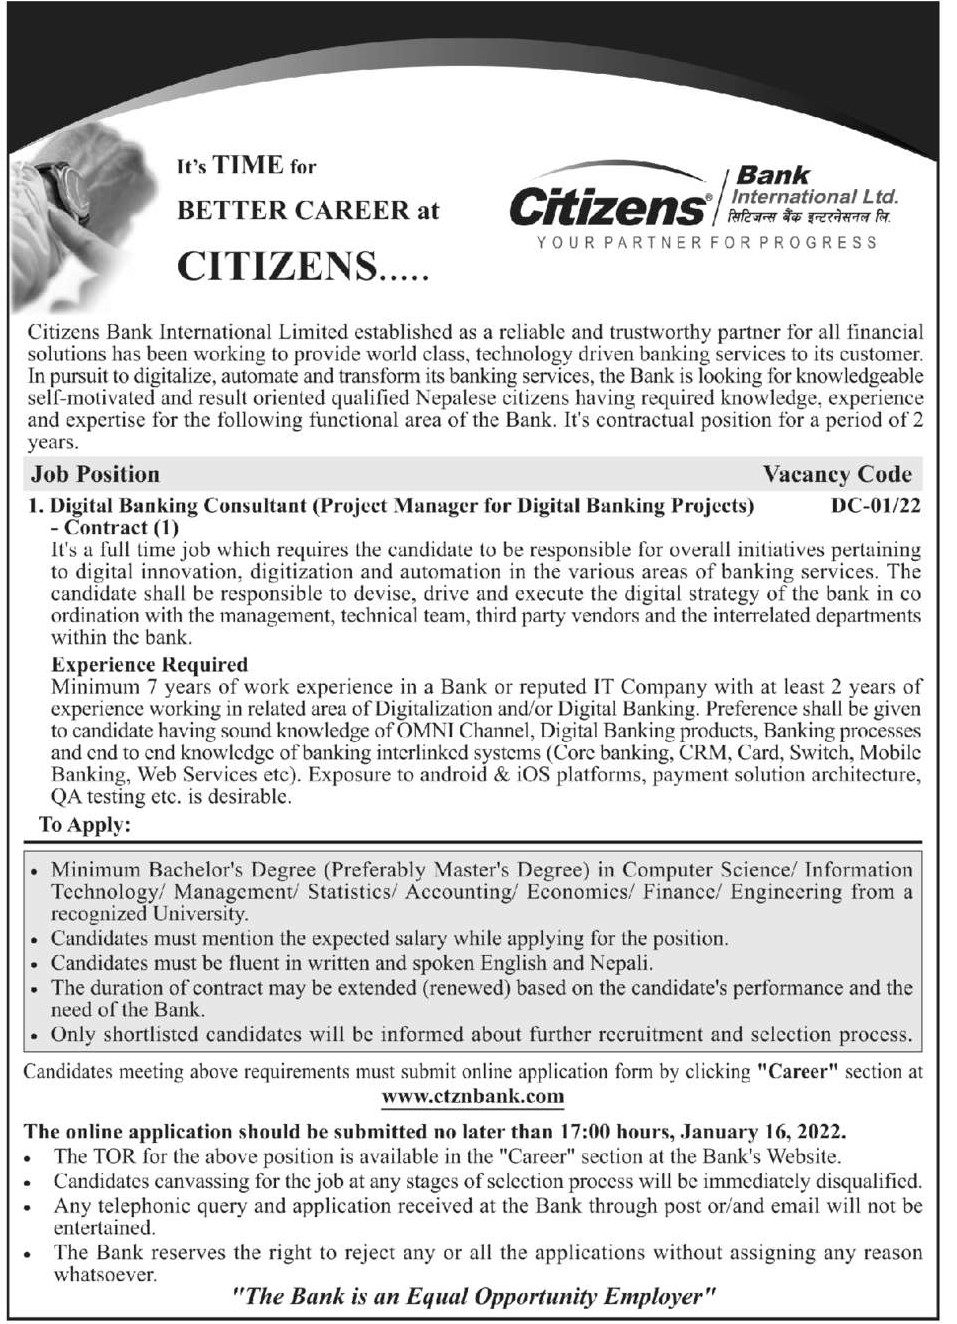 Digital Banking Consultant (Project Manager for Digital Banking Projects)